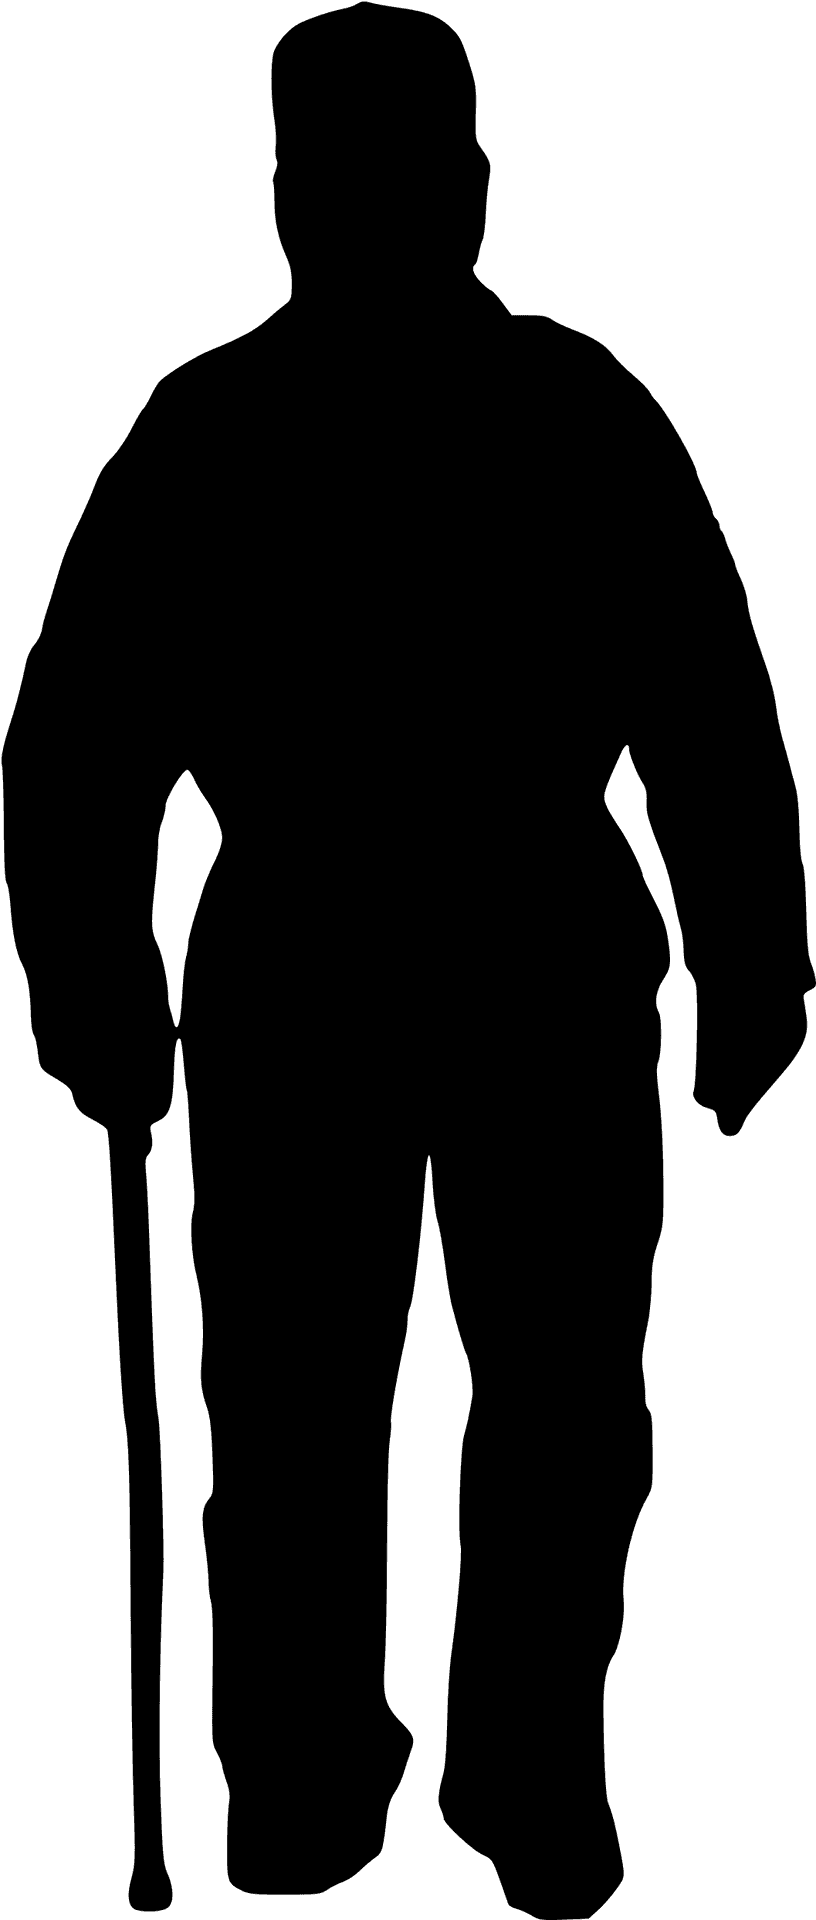 Person_with_ Cane_ Silhouette PNG